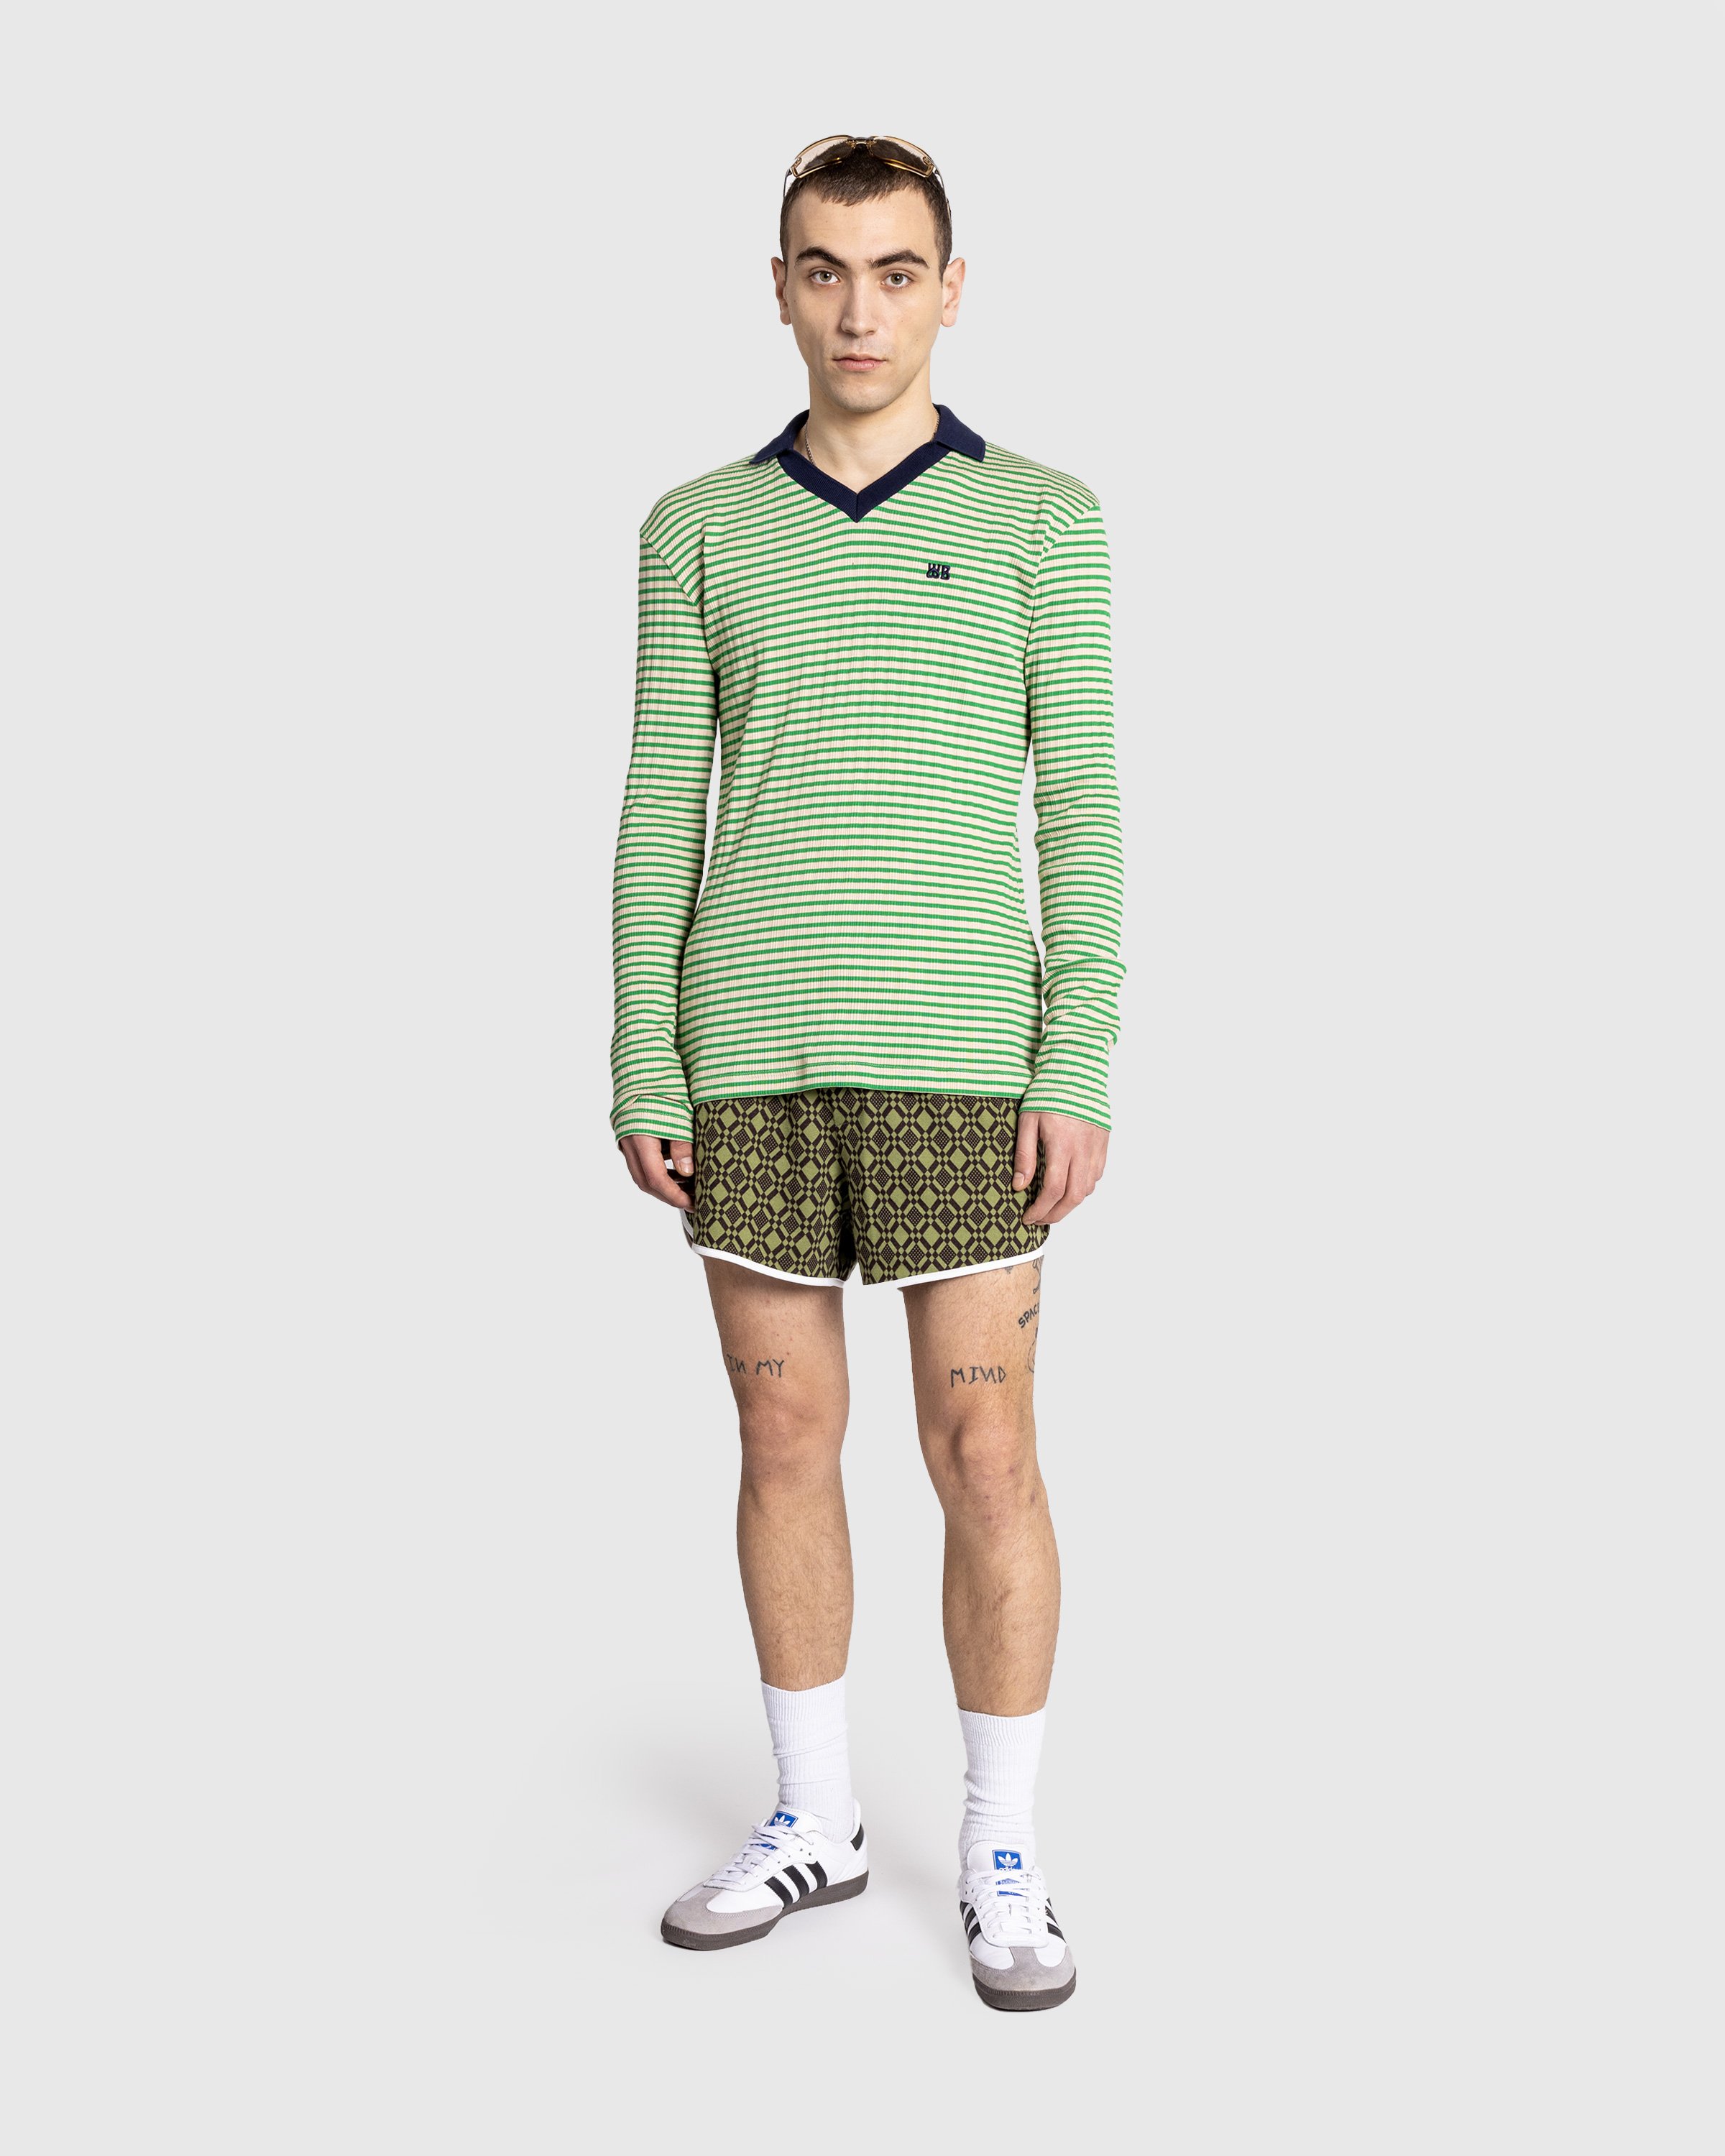 Wales Bonner - Polo Striped Green - Clothing - Green - Image 3